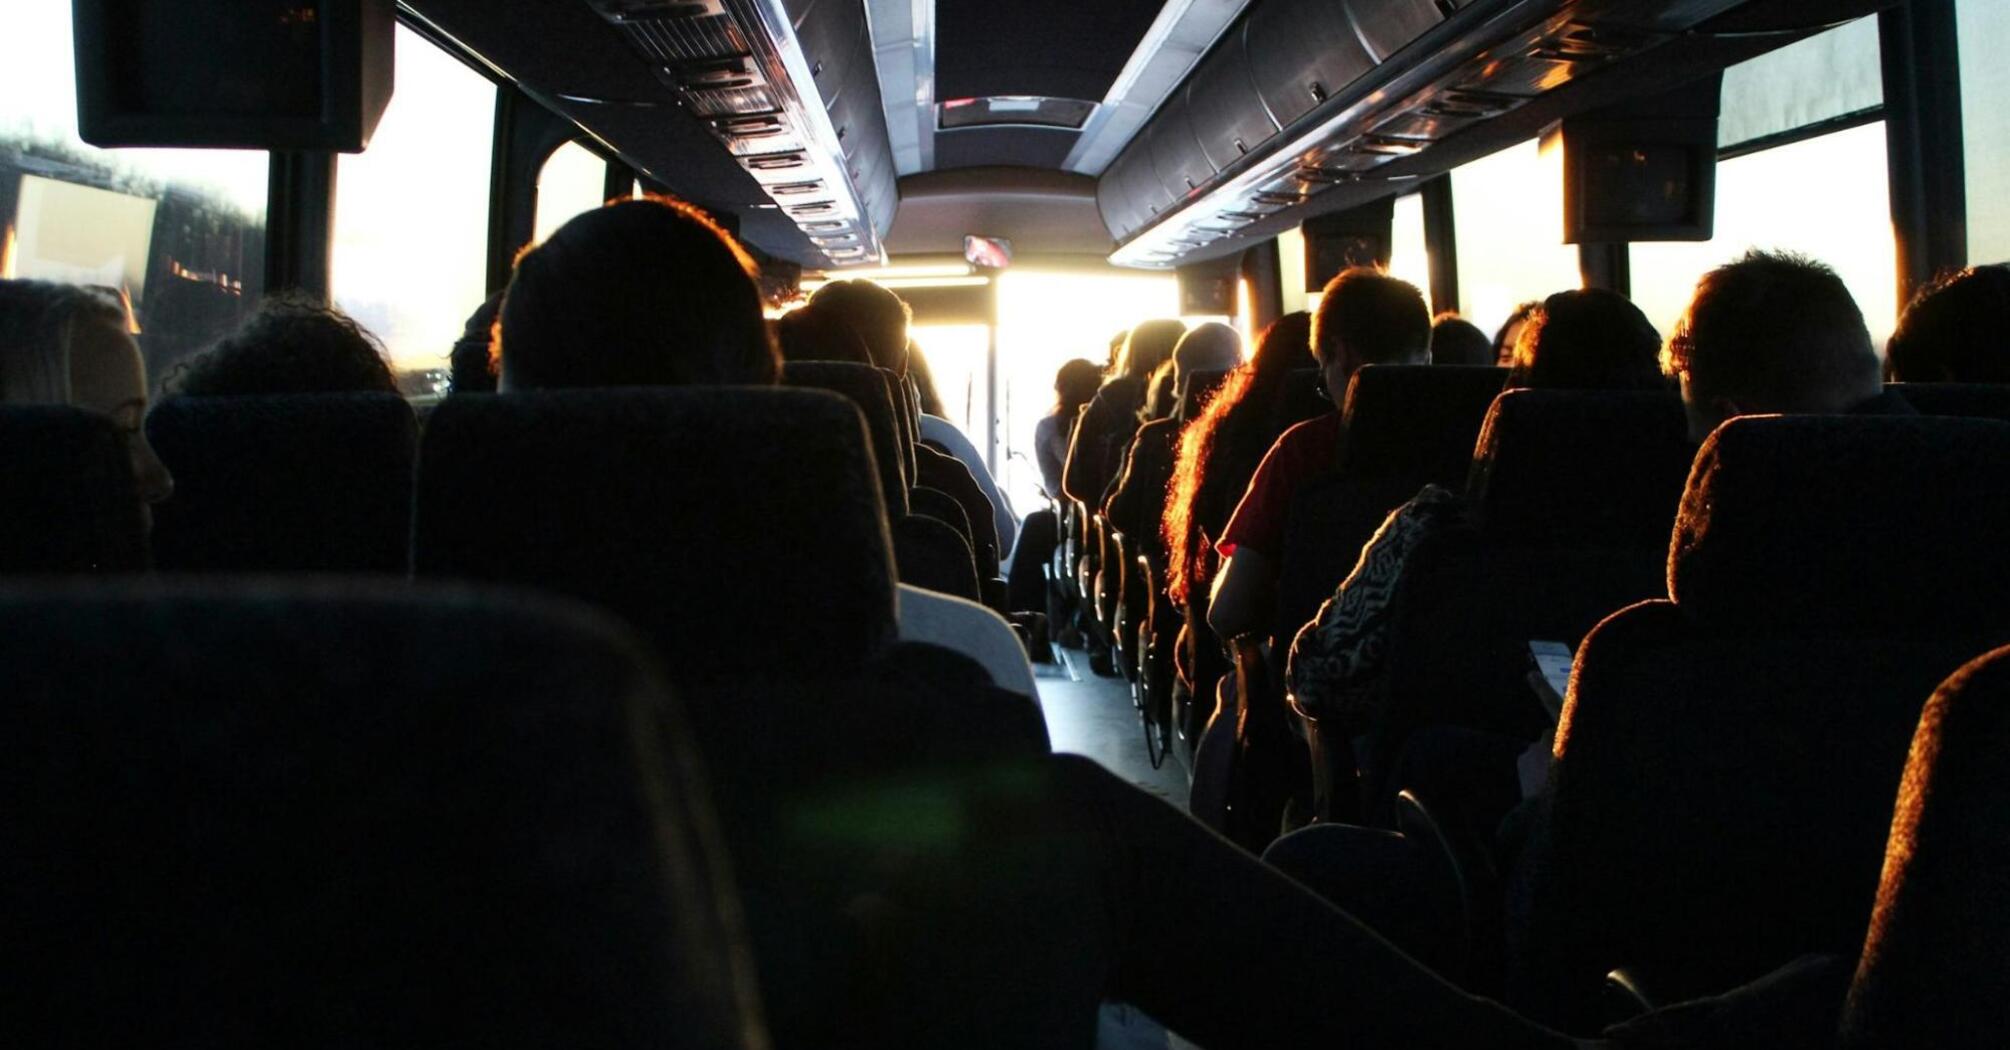 Passengers seated inside a bus during sunset